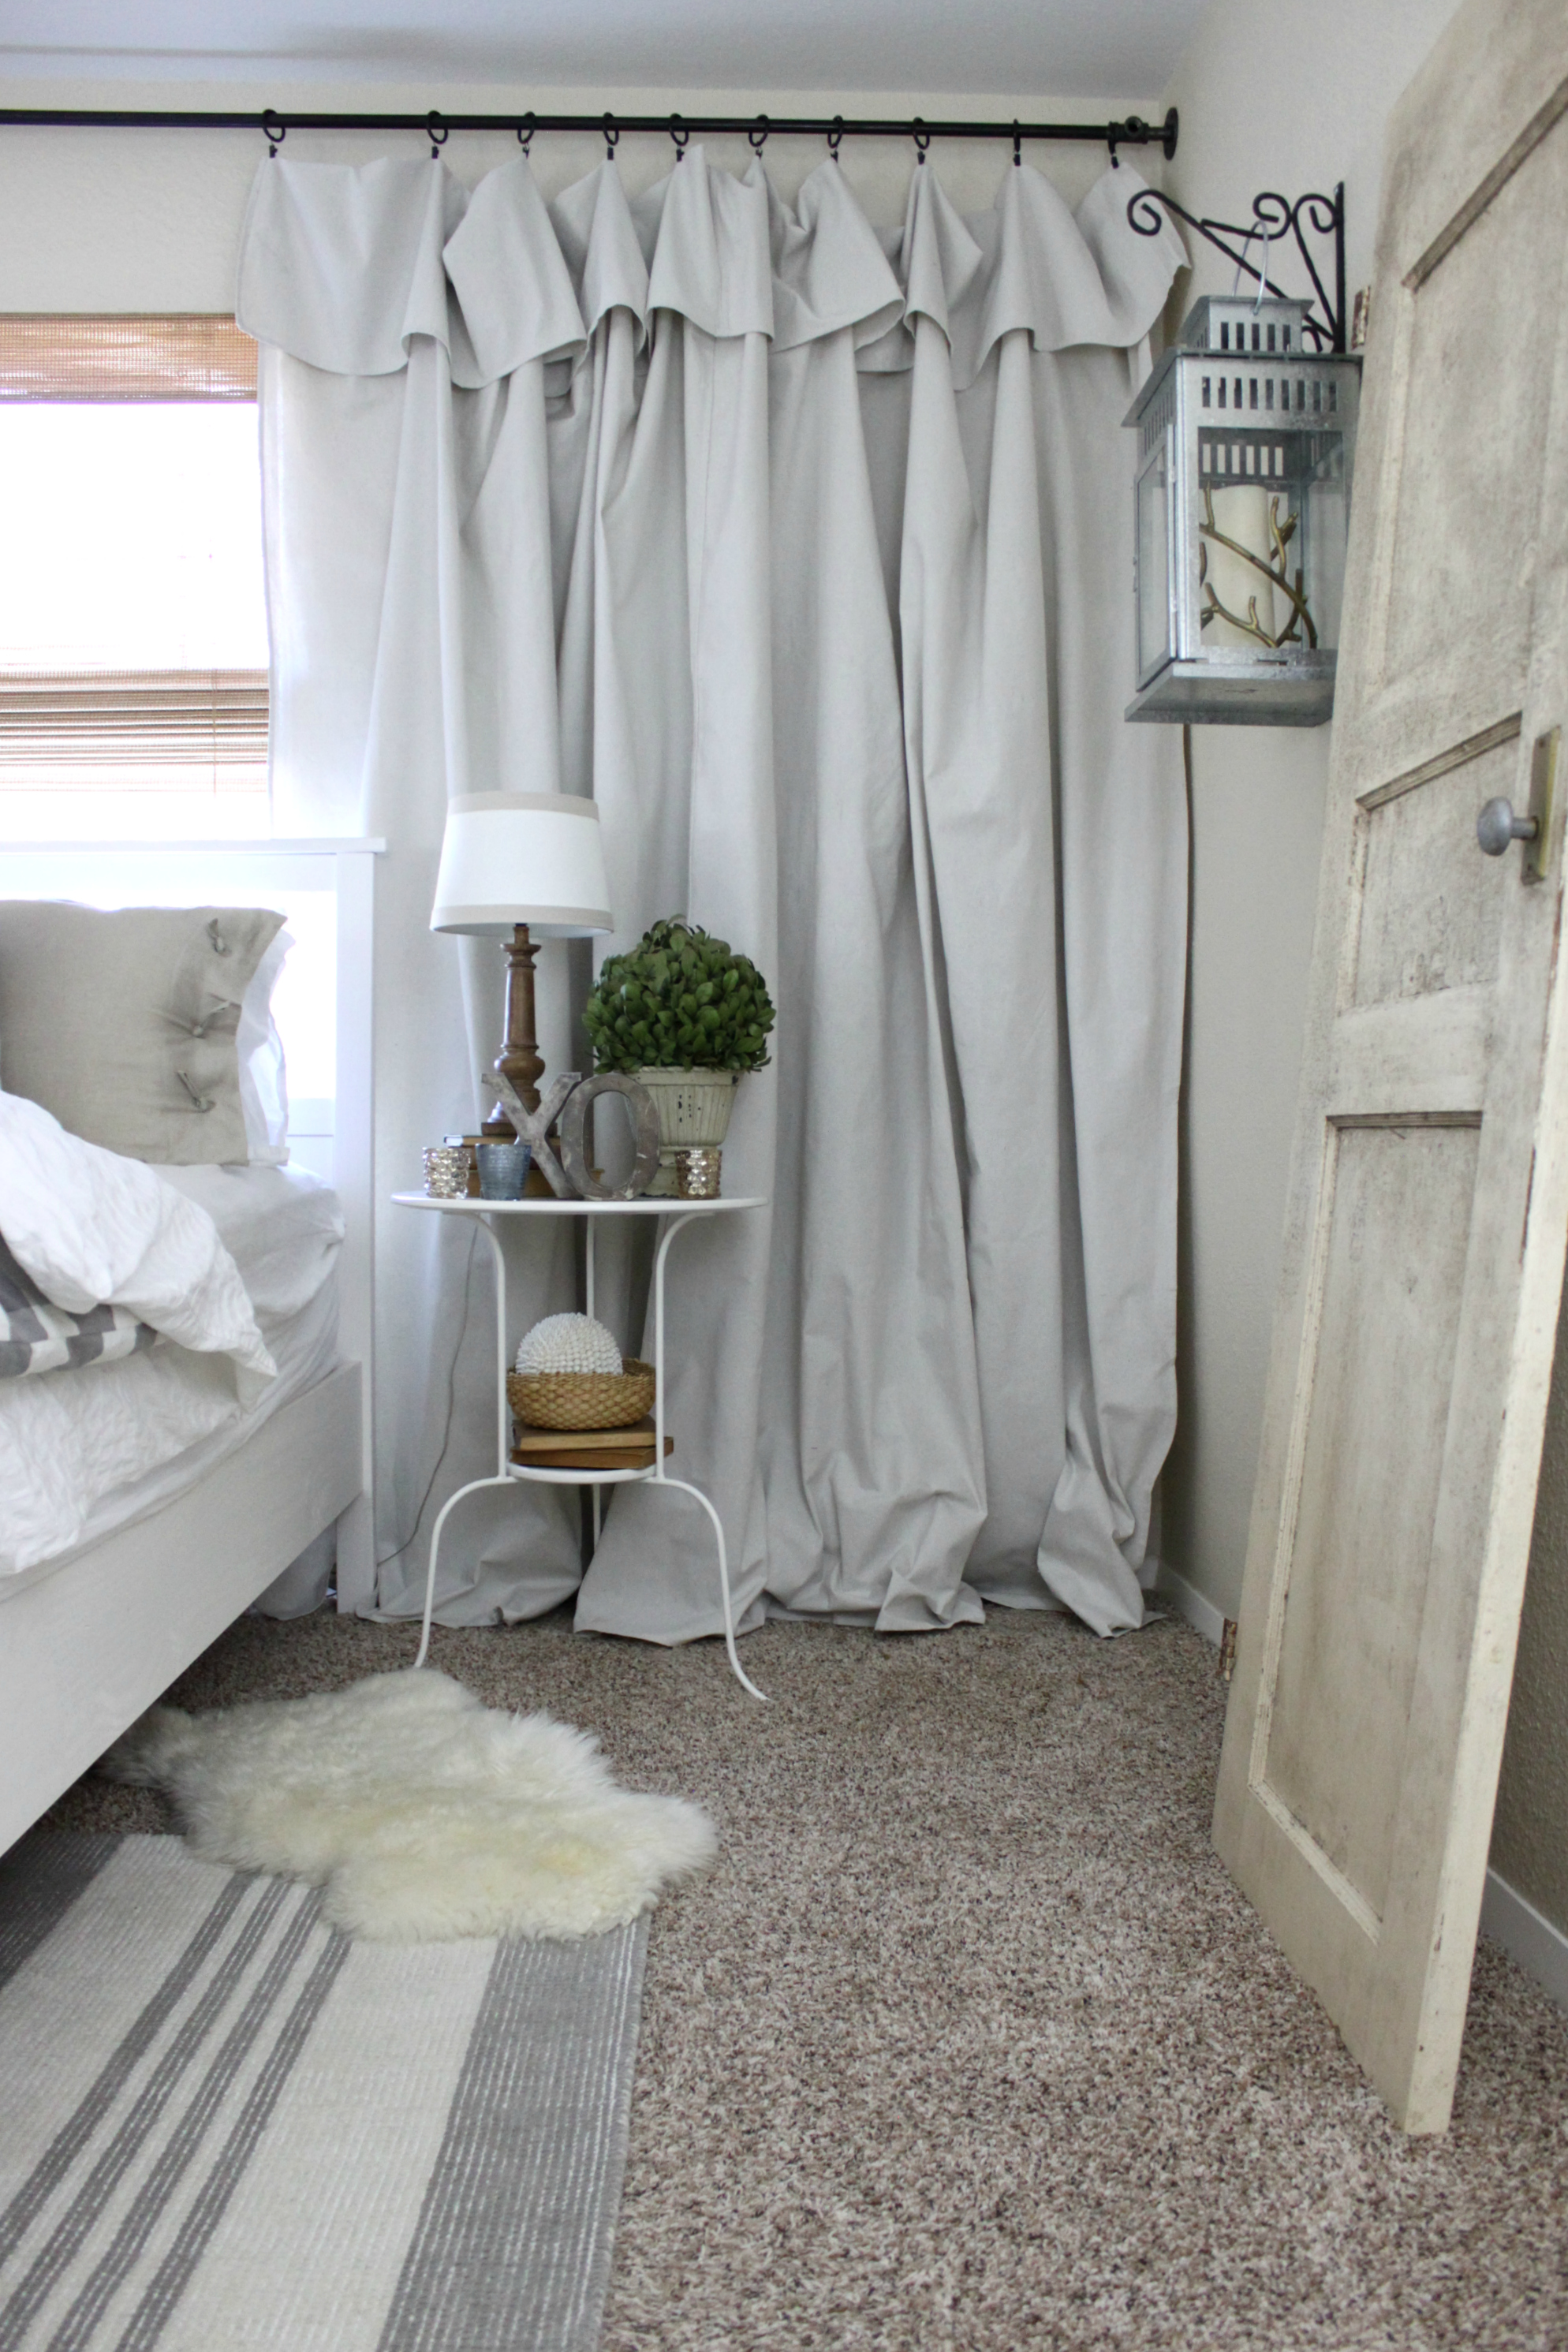 The Easiest Curtains You'll Ever Hang by An Inspired Nest